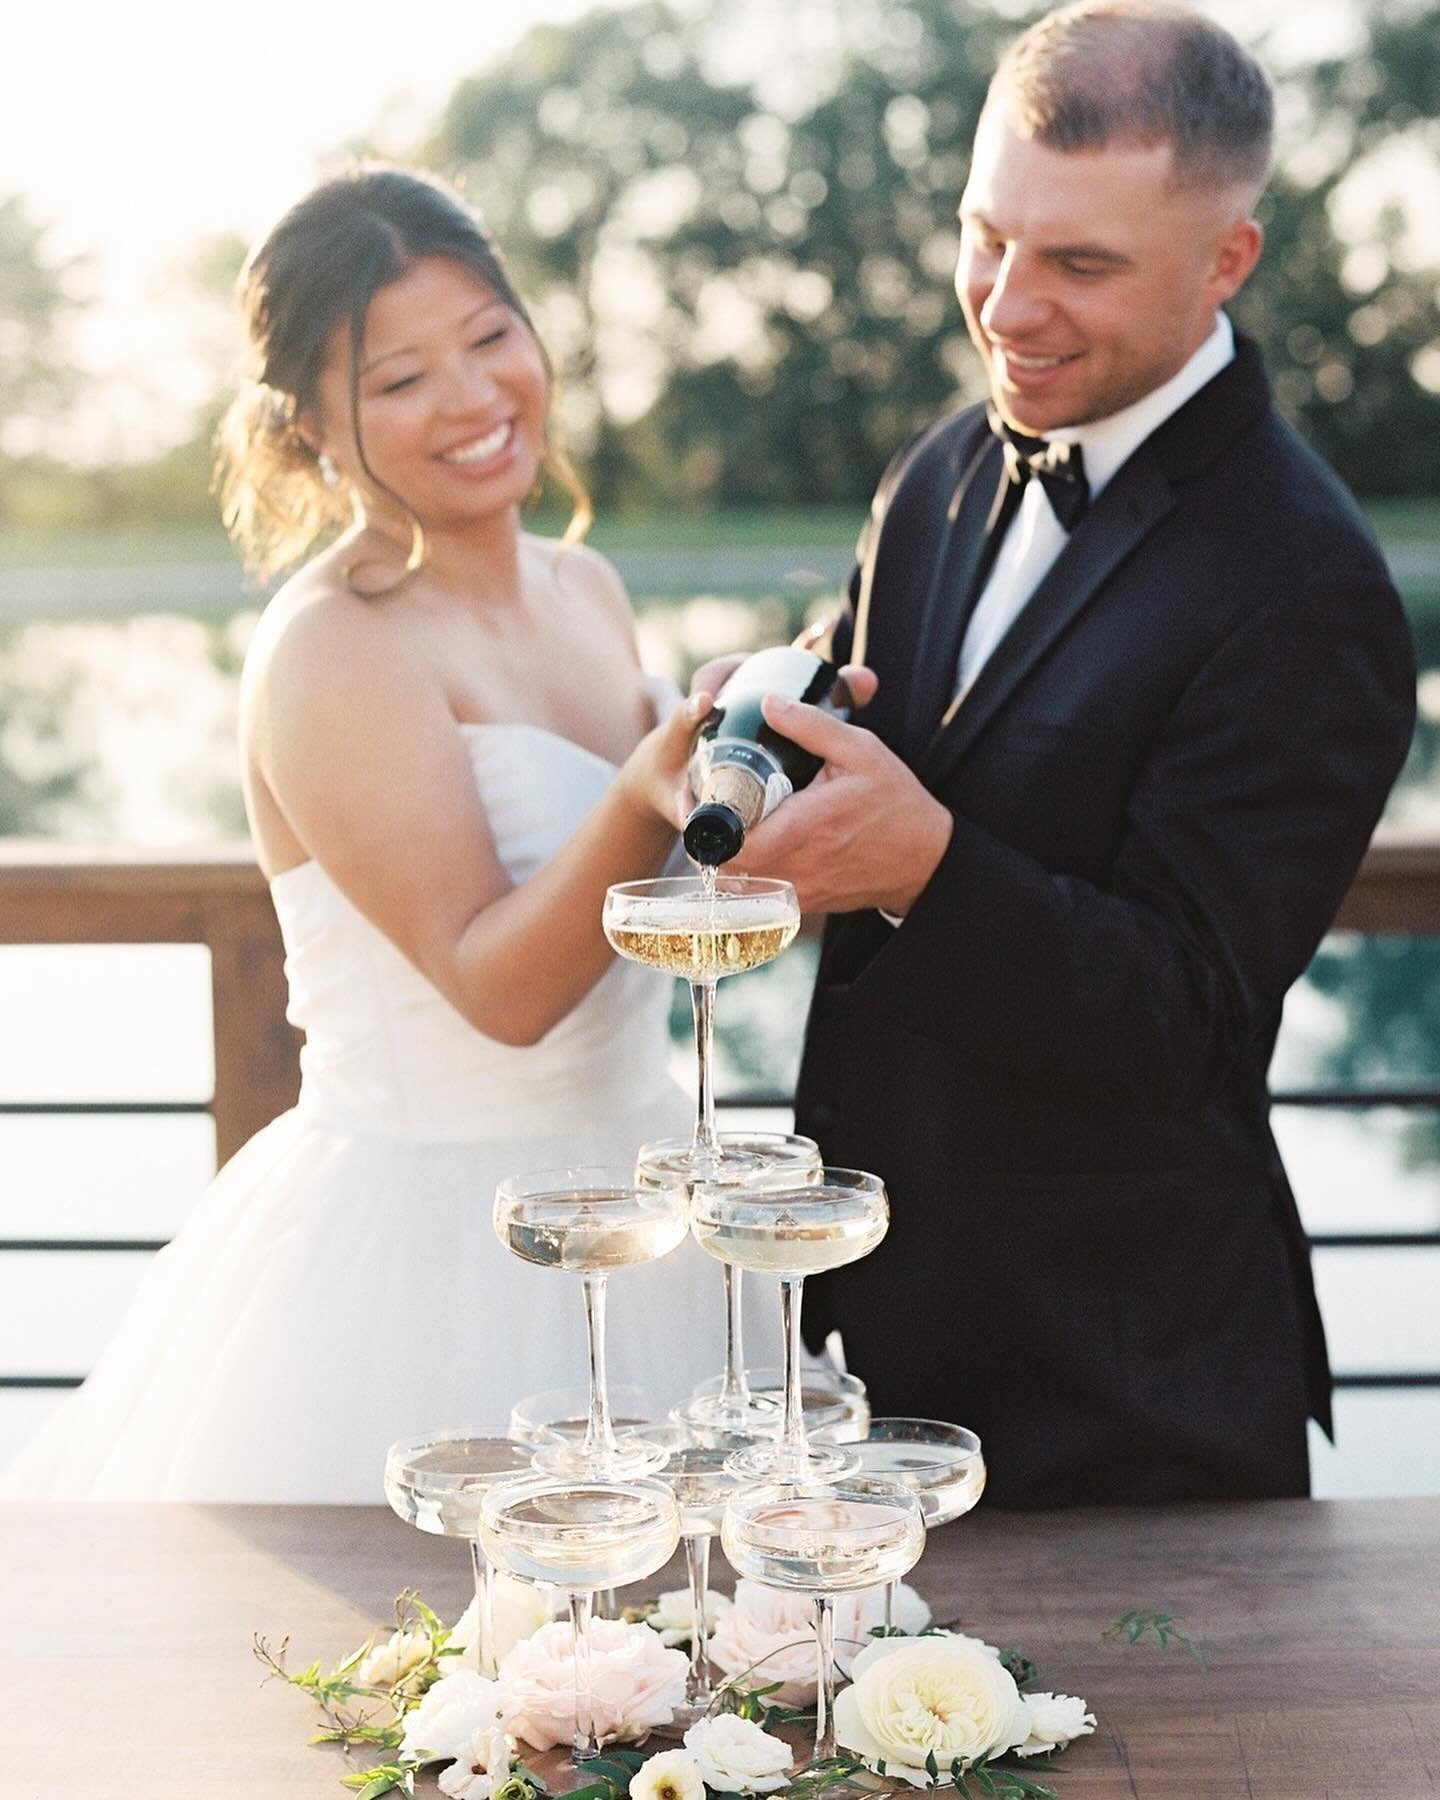 The number of couples participating in cocktail hour alongside their guests is rising, and here&rsquo;s why I think it&rsquo;s noteworthy: 
⠀⠀⠀⠀⠀⠀⠀⠀⠀
1️⃣ Your guests travel far and near to visit you on your wedding day. For example, my couple&rsquo;s